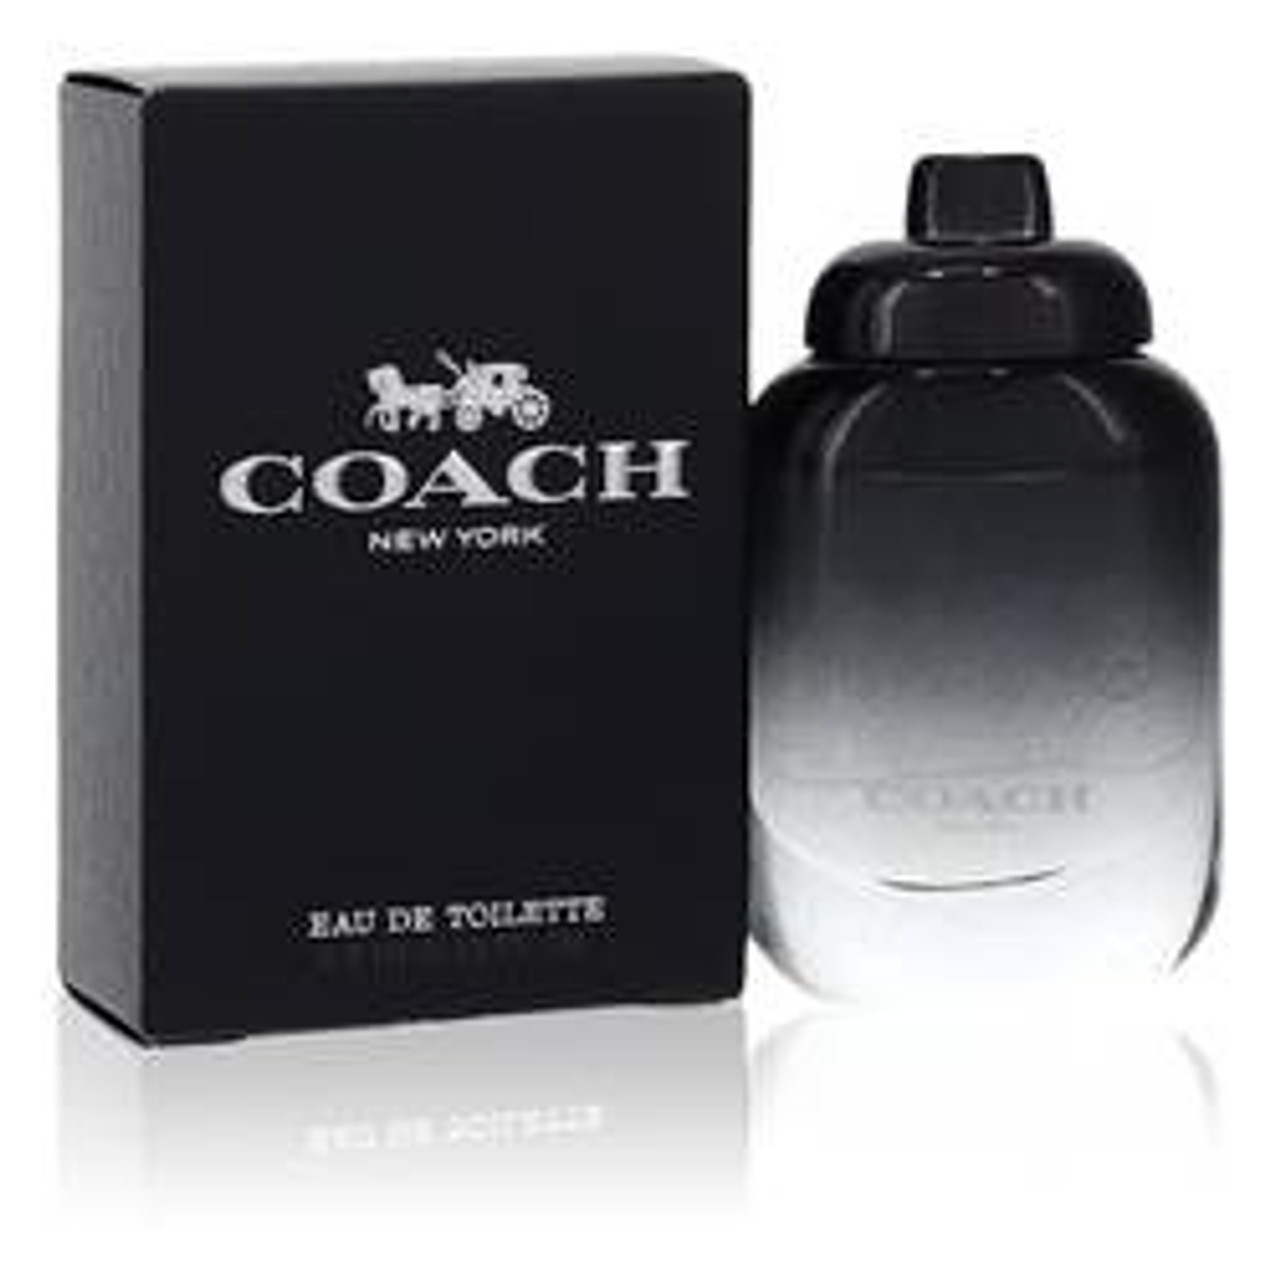 Coach Cologne By Coach Mini EDT 0.15 oz for Men - [From 39.00 - Choose pk Qty ] - *Ships from Miami